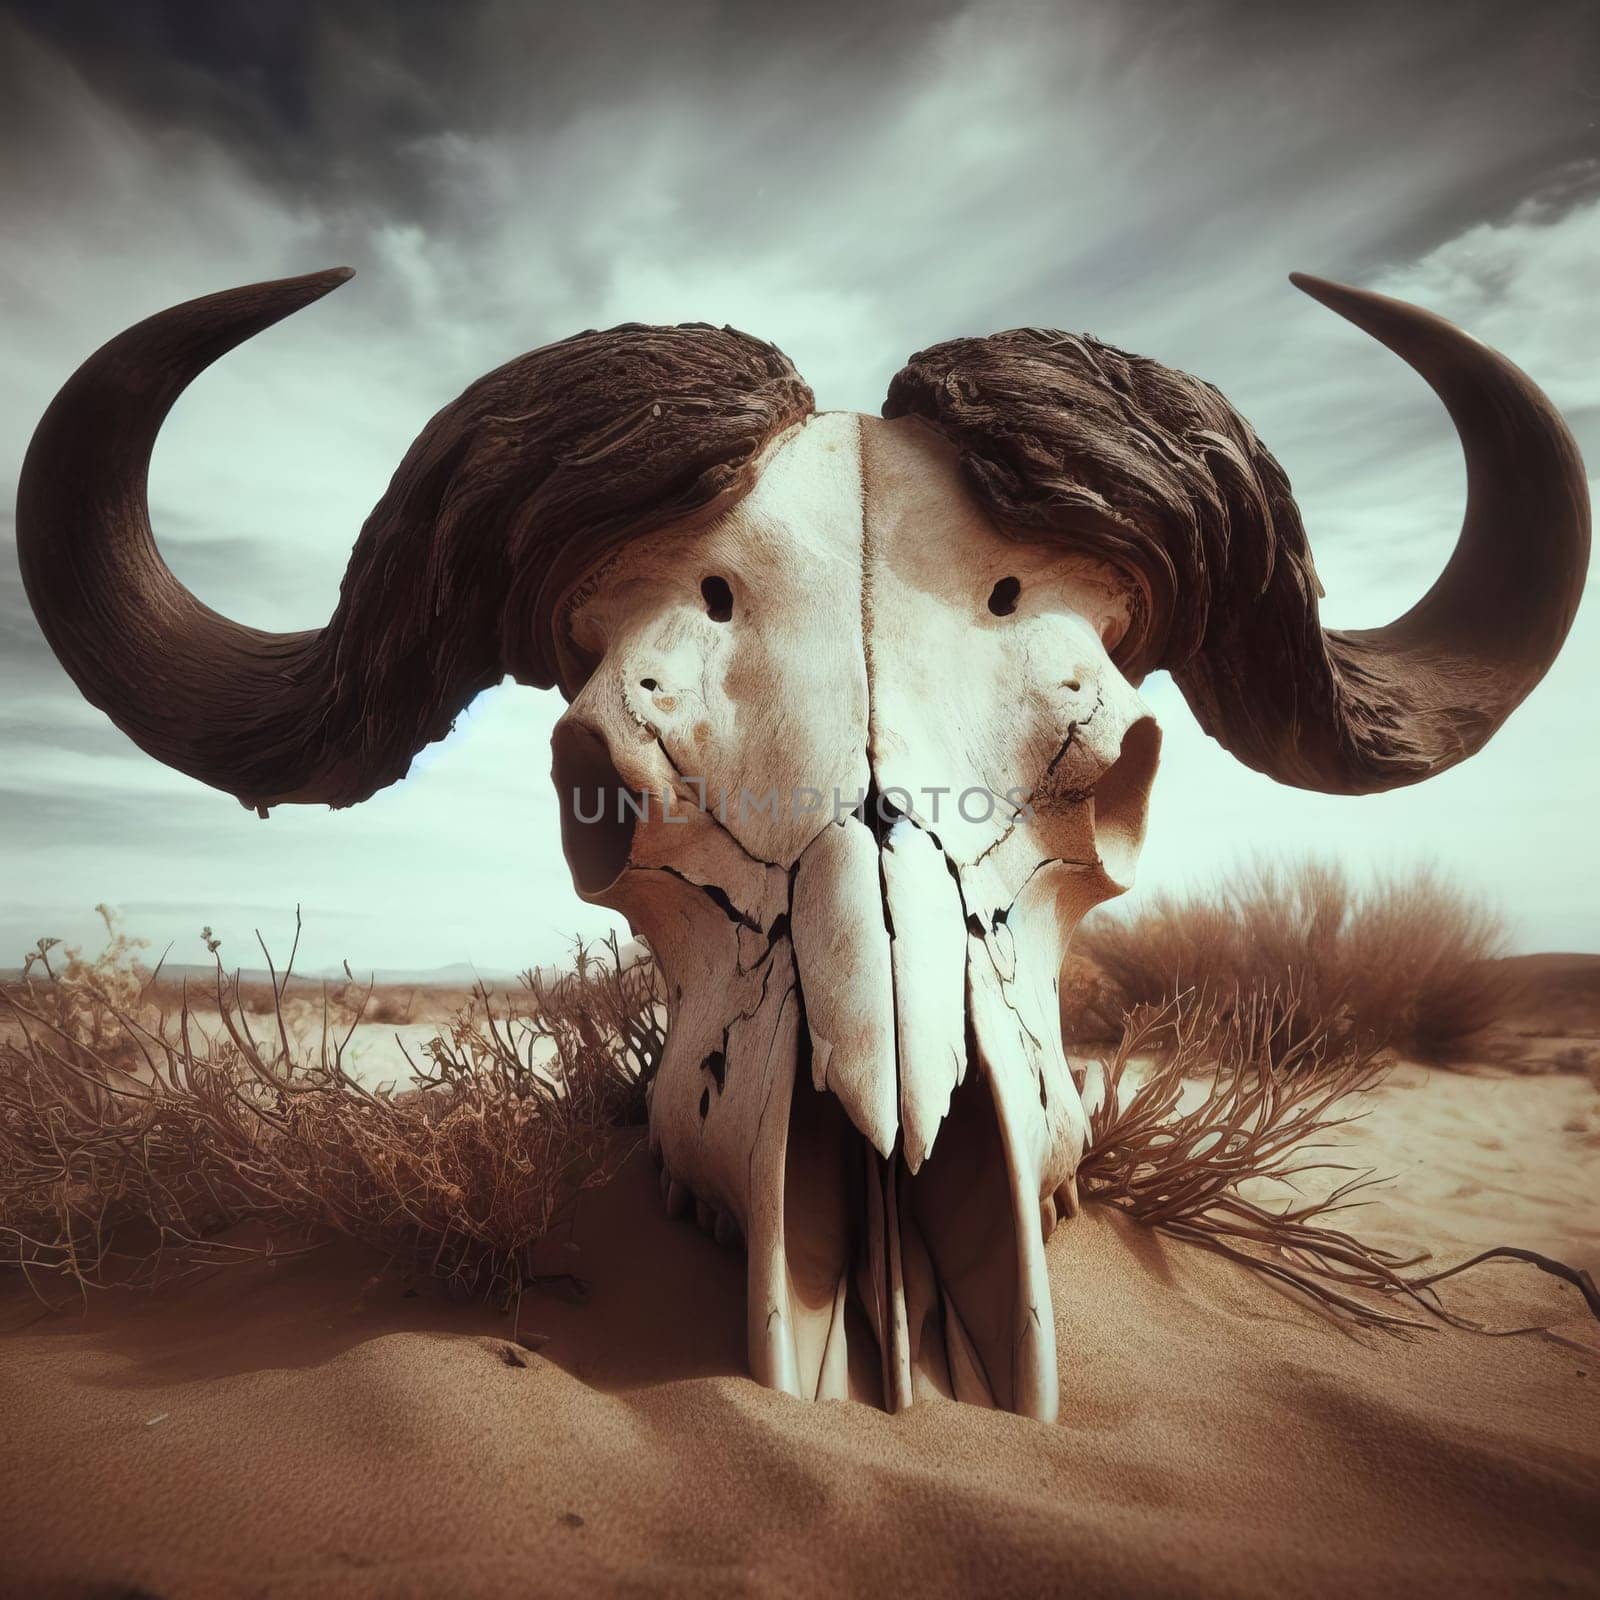 A weathered cow skull lying on the ground. Dried bull skull with dark, curved horns lie on sand on sky background - forest pollution